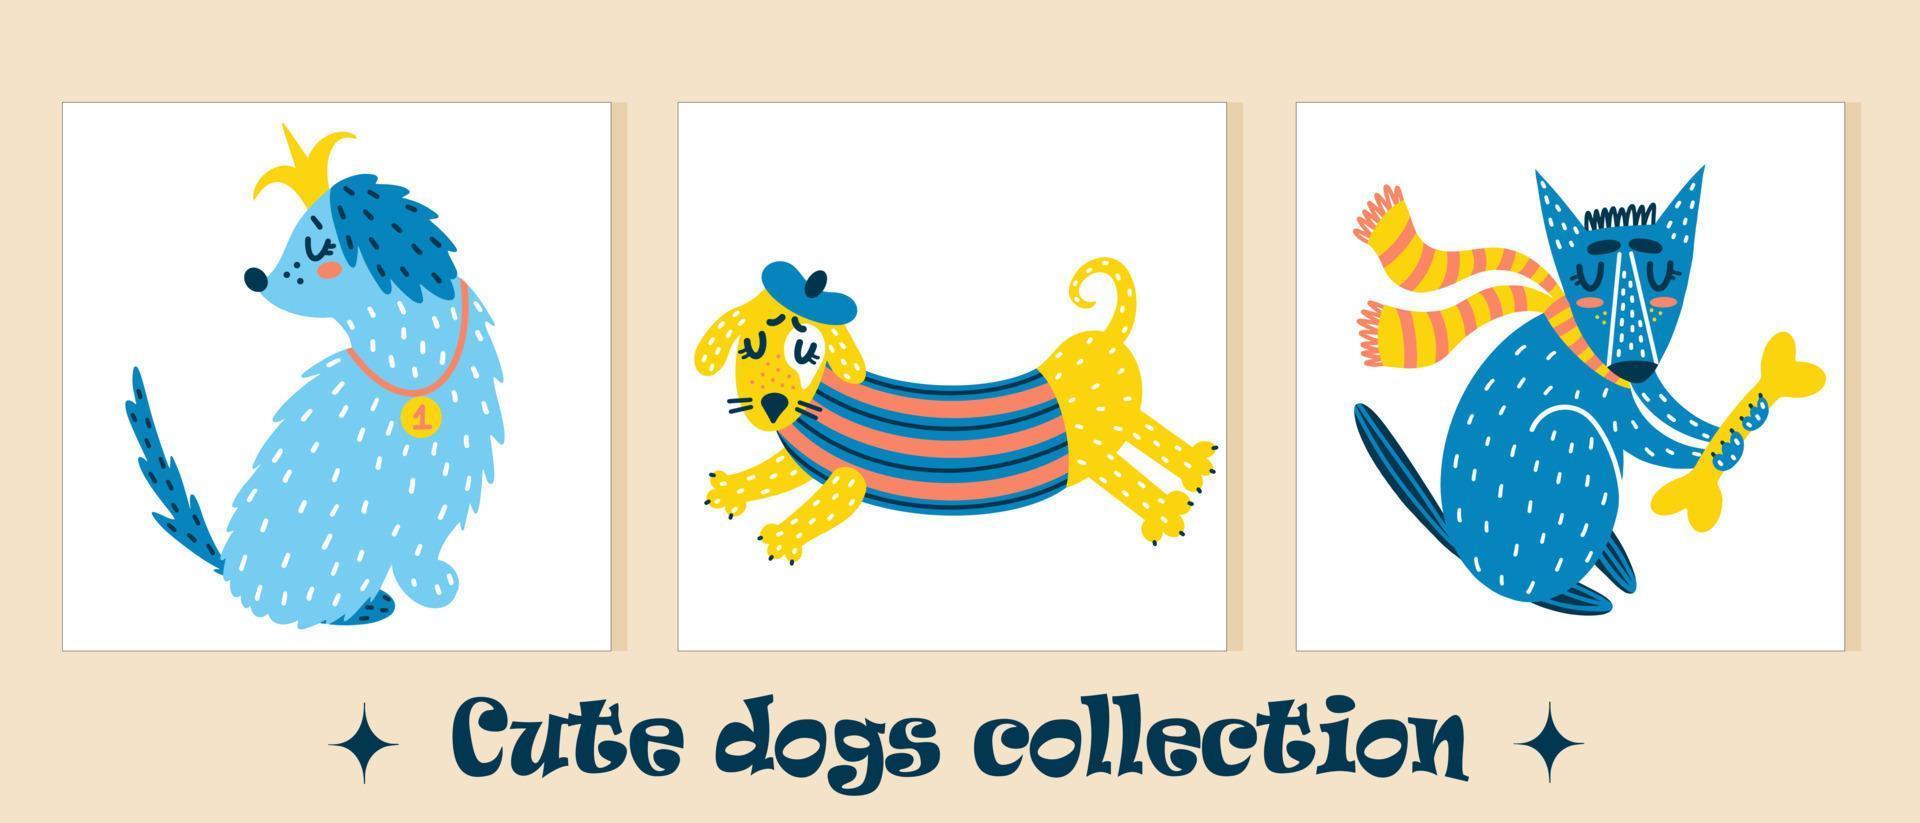 Collection of cute cartoon dogs. Set of vector icons with pets. Hand-drawn colored animal doodles. Set of posters with puppies. Vector illustration on a white background in a flat style.